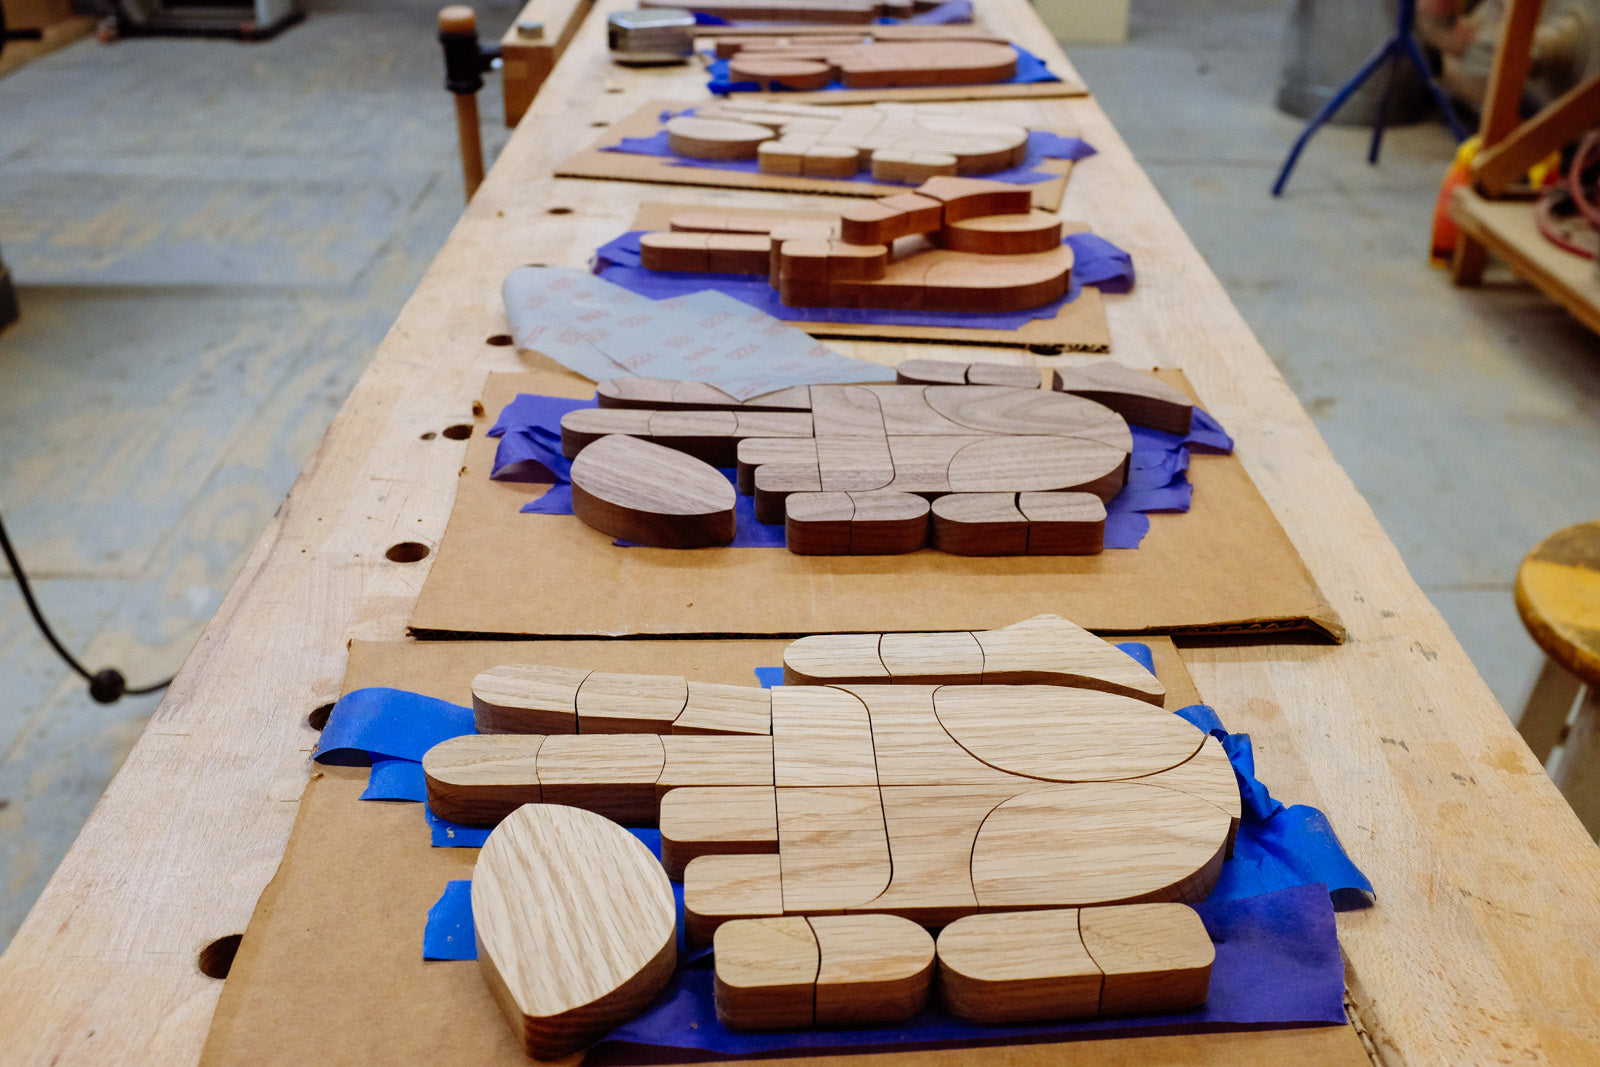 View of assembled wood designs.